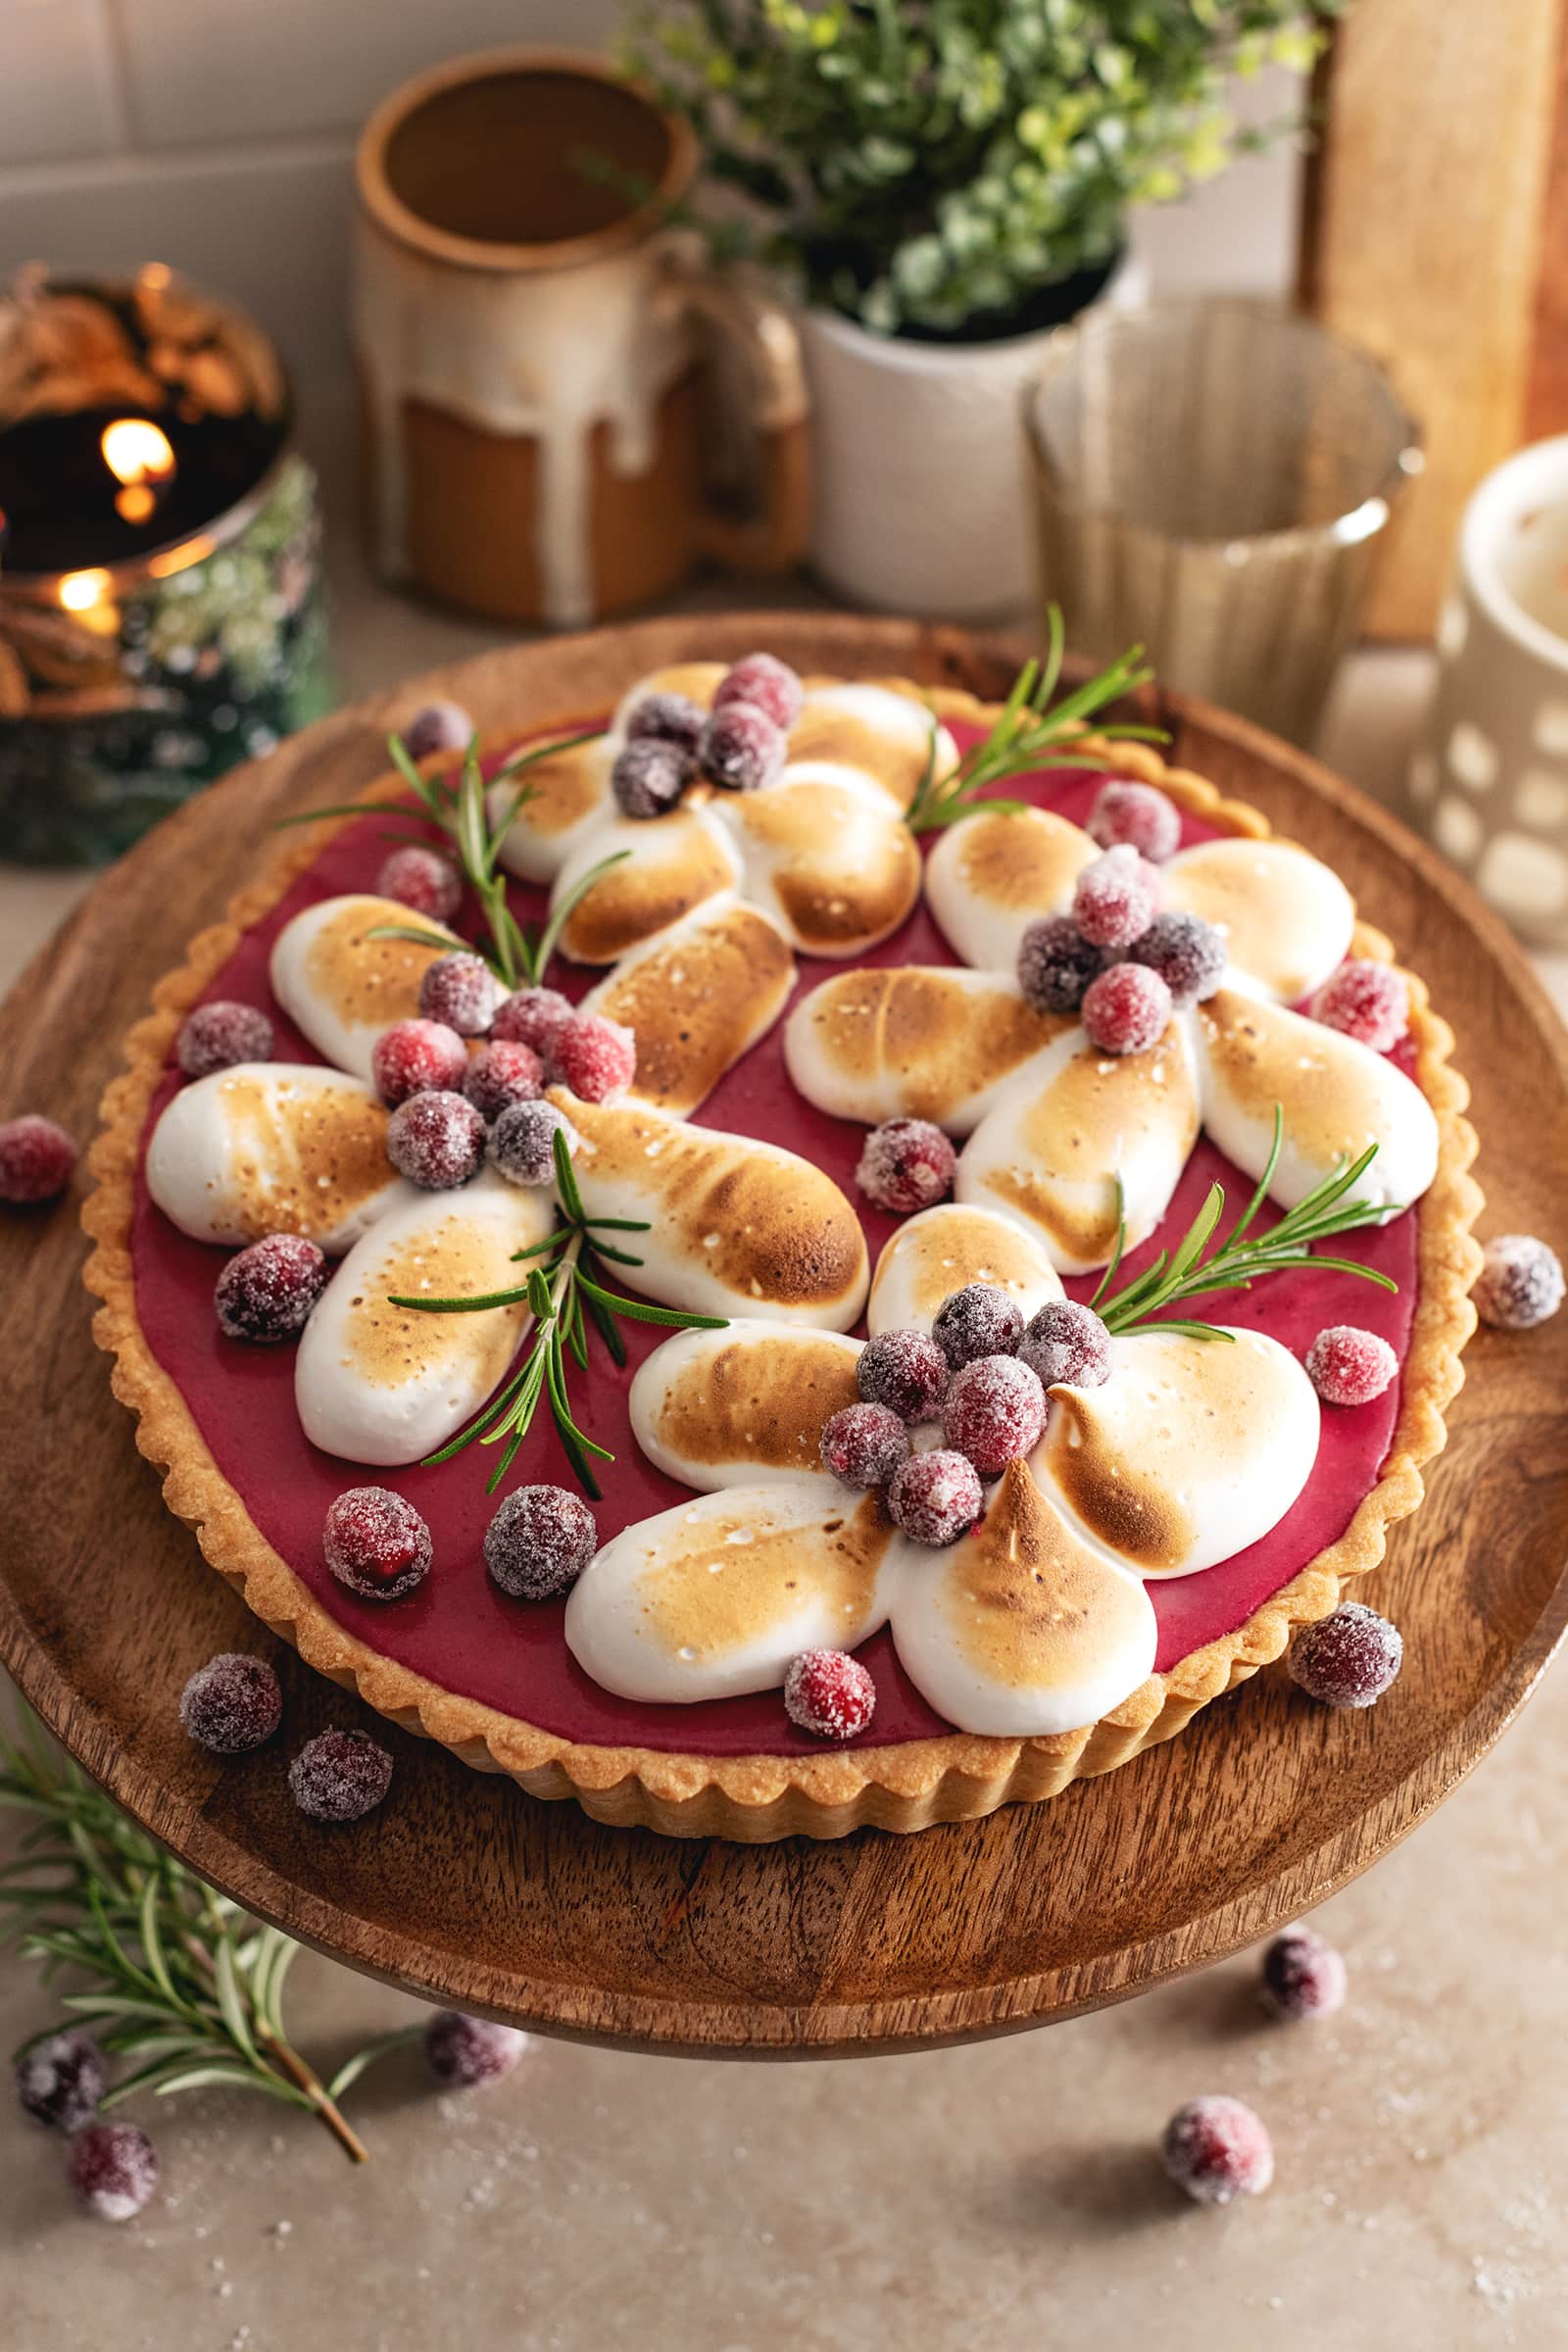 A cranberry meringue tart on a wooden cake stand.